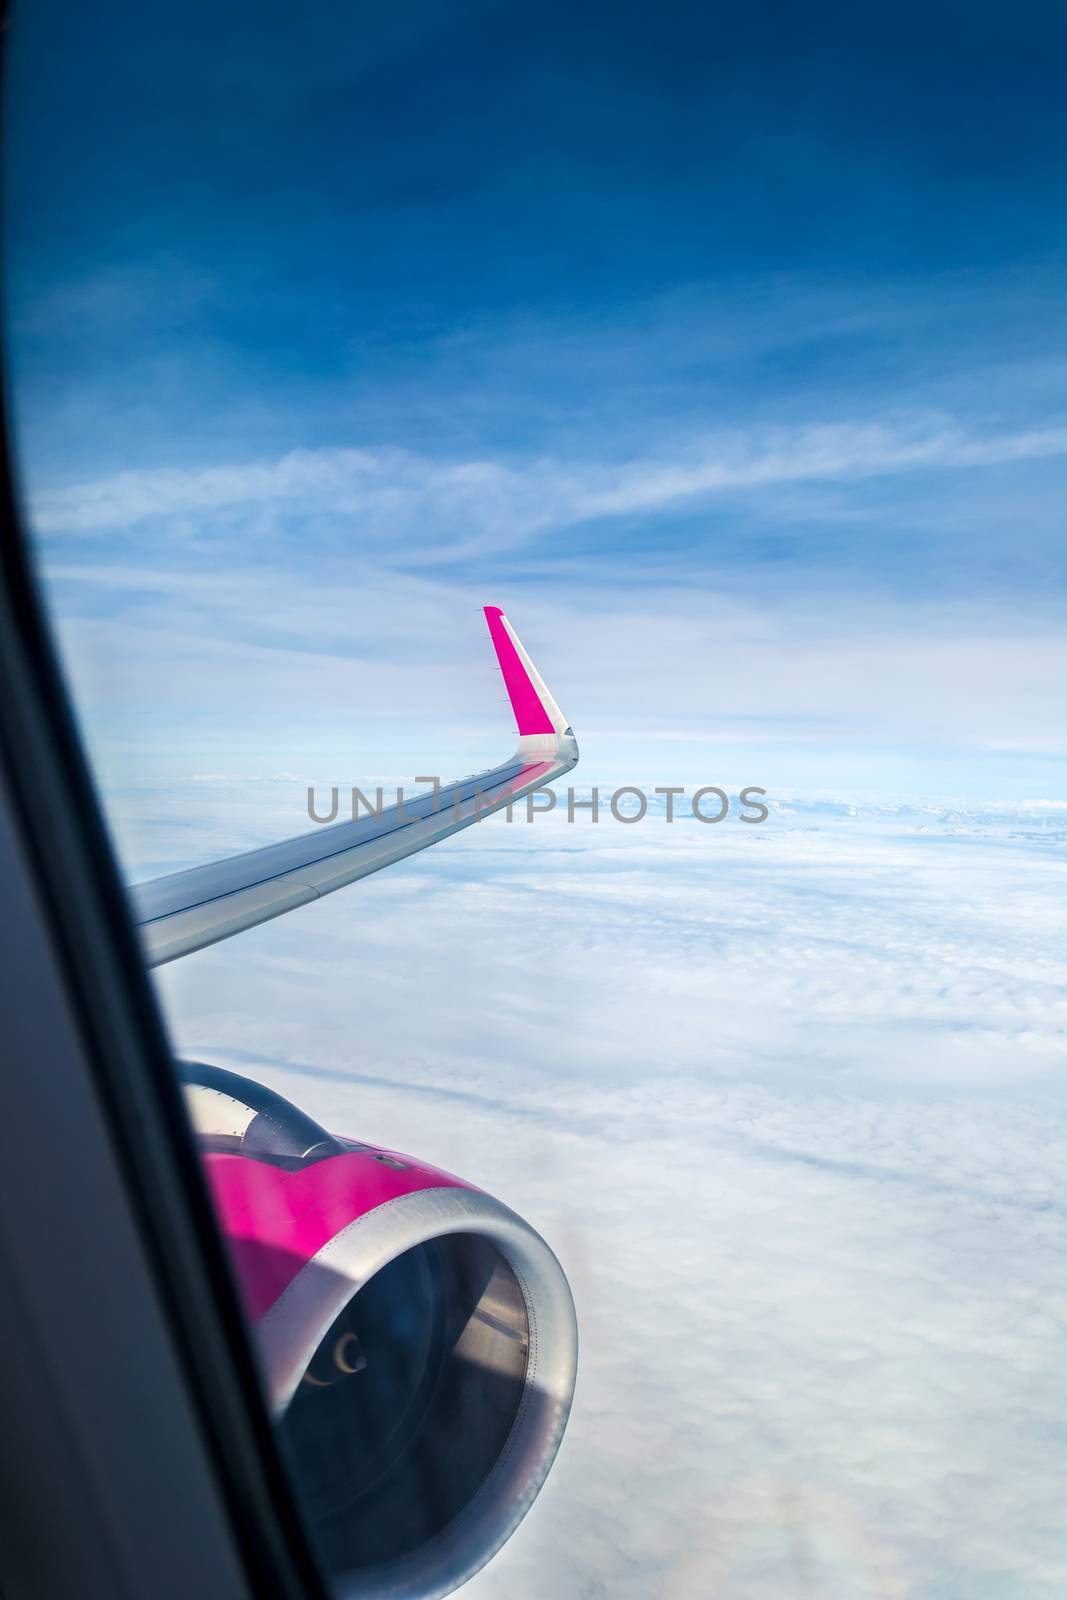 Sky from a plain. View through the window of an aircraft. Wing of the plane above clouds.